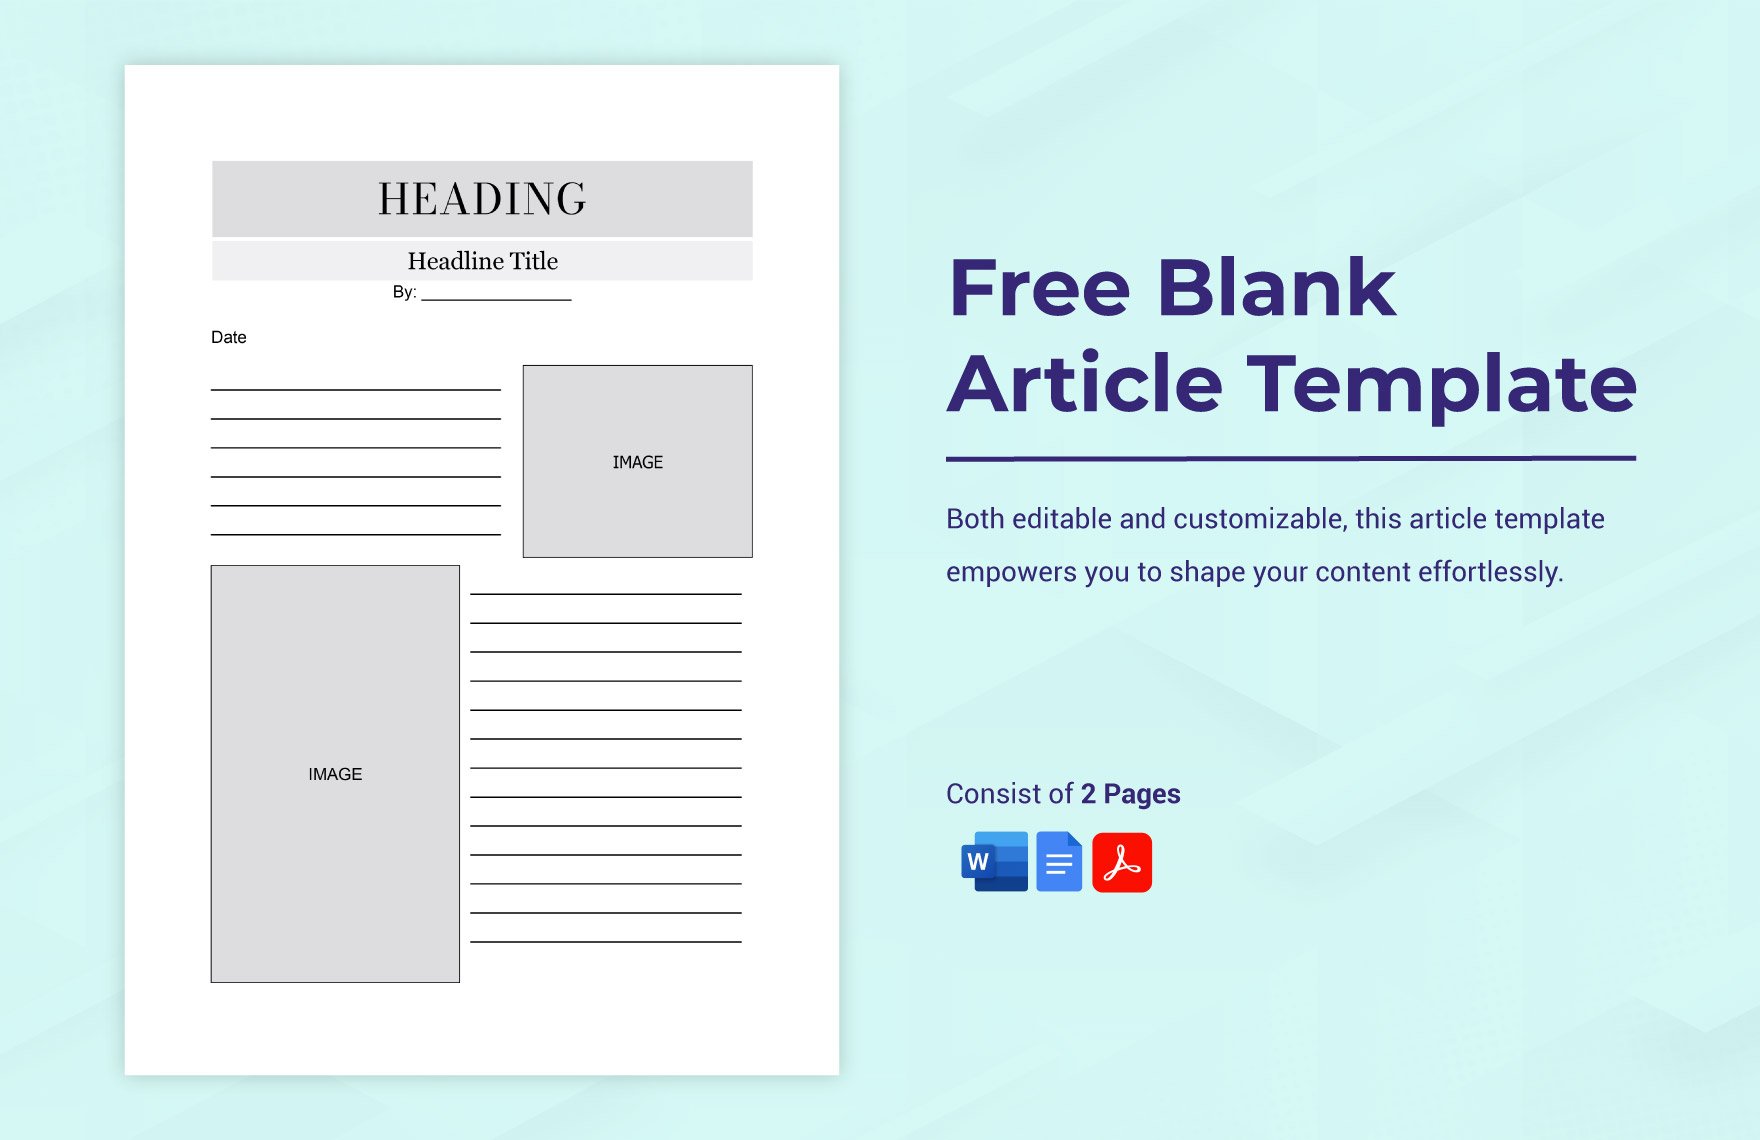 Free Blank Article Template - Download in Word, Google Docs, PDF ...